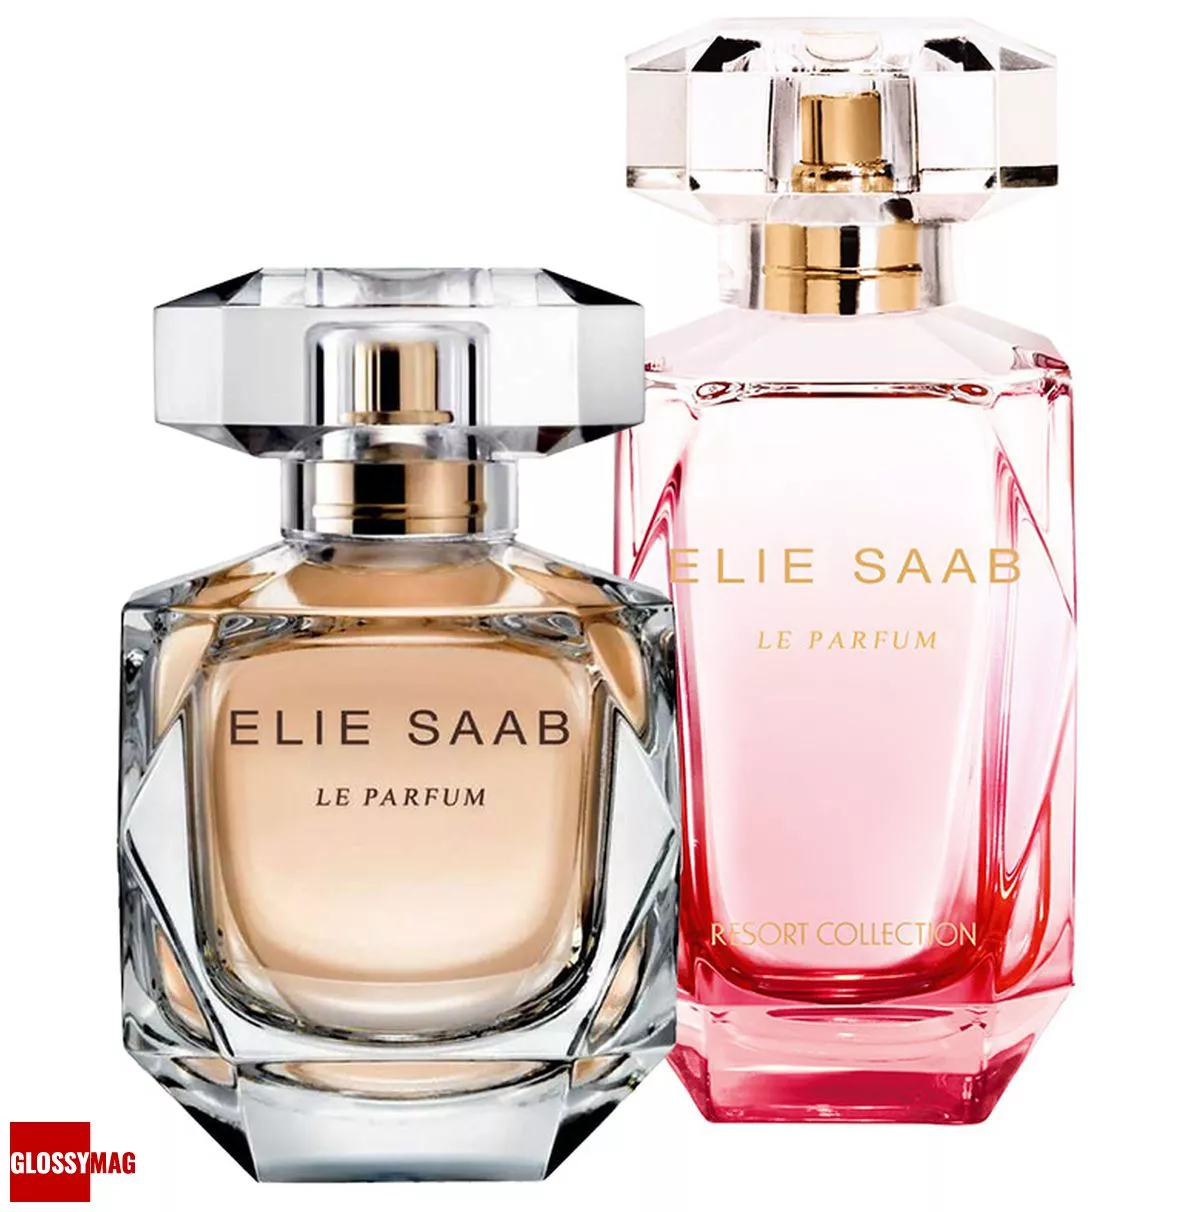 Elie Saab, Elie Saab Le Parfum; Elie Saab Le Parfum Resort Collection